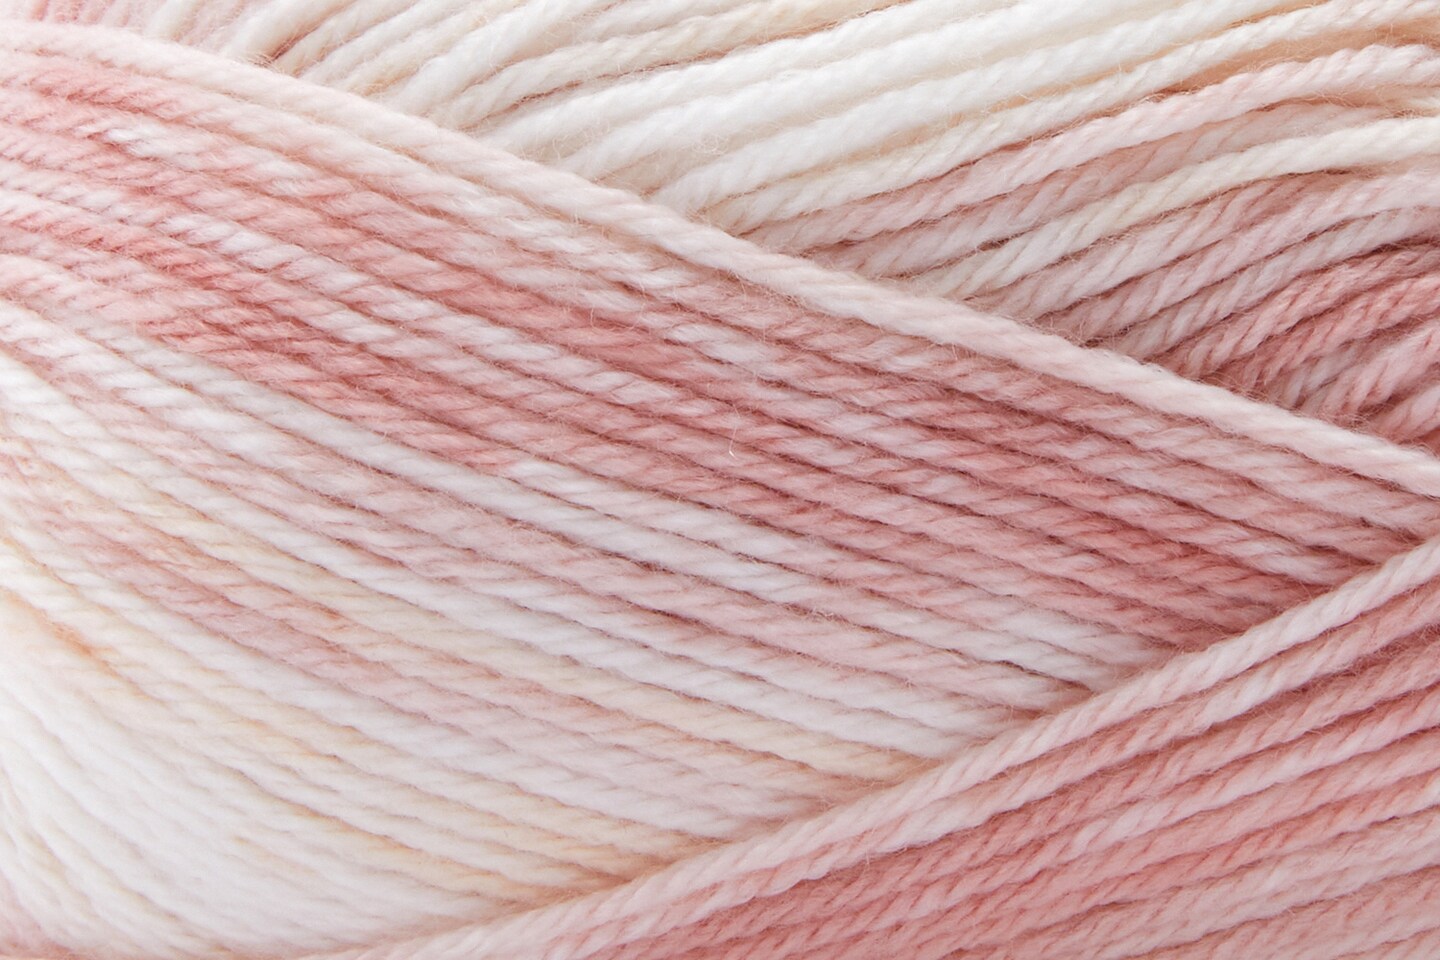 Uptown Worsted Hues by Universal Yarn - 100% Acrylic Yarn - #3306 Painted Desert